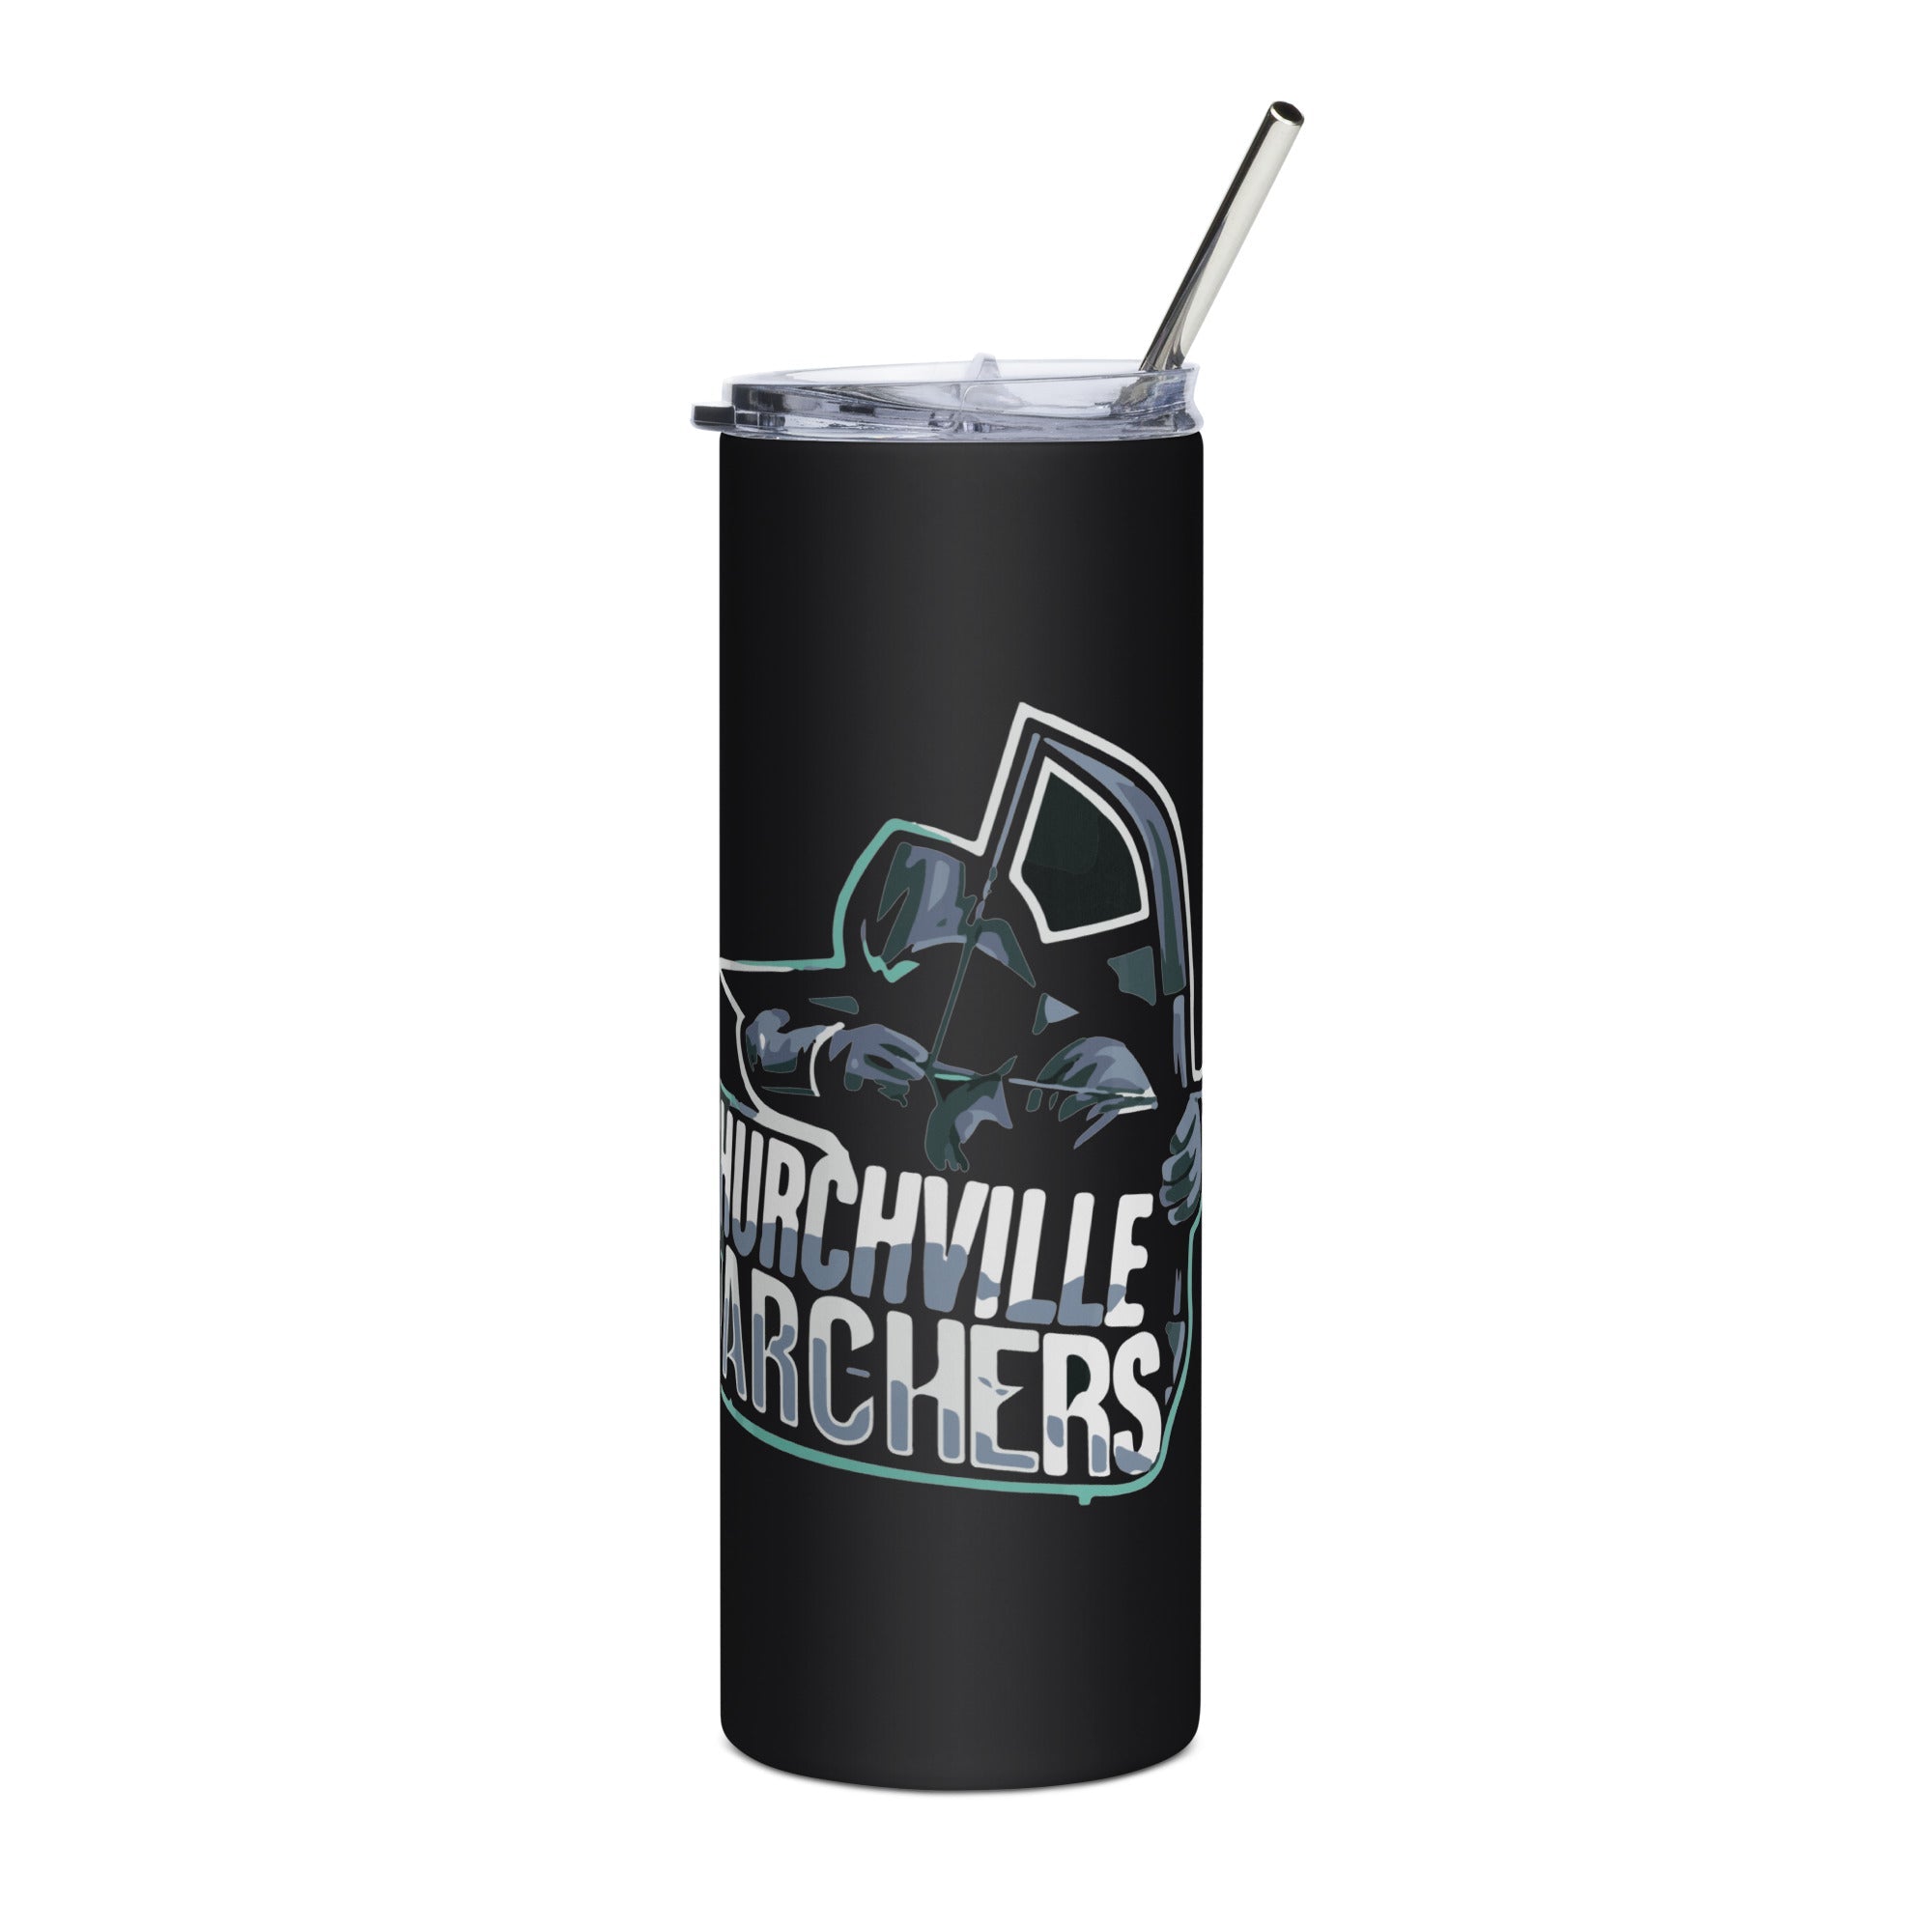 CW Stainless steel tumbler